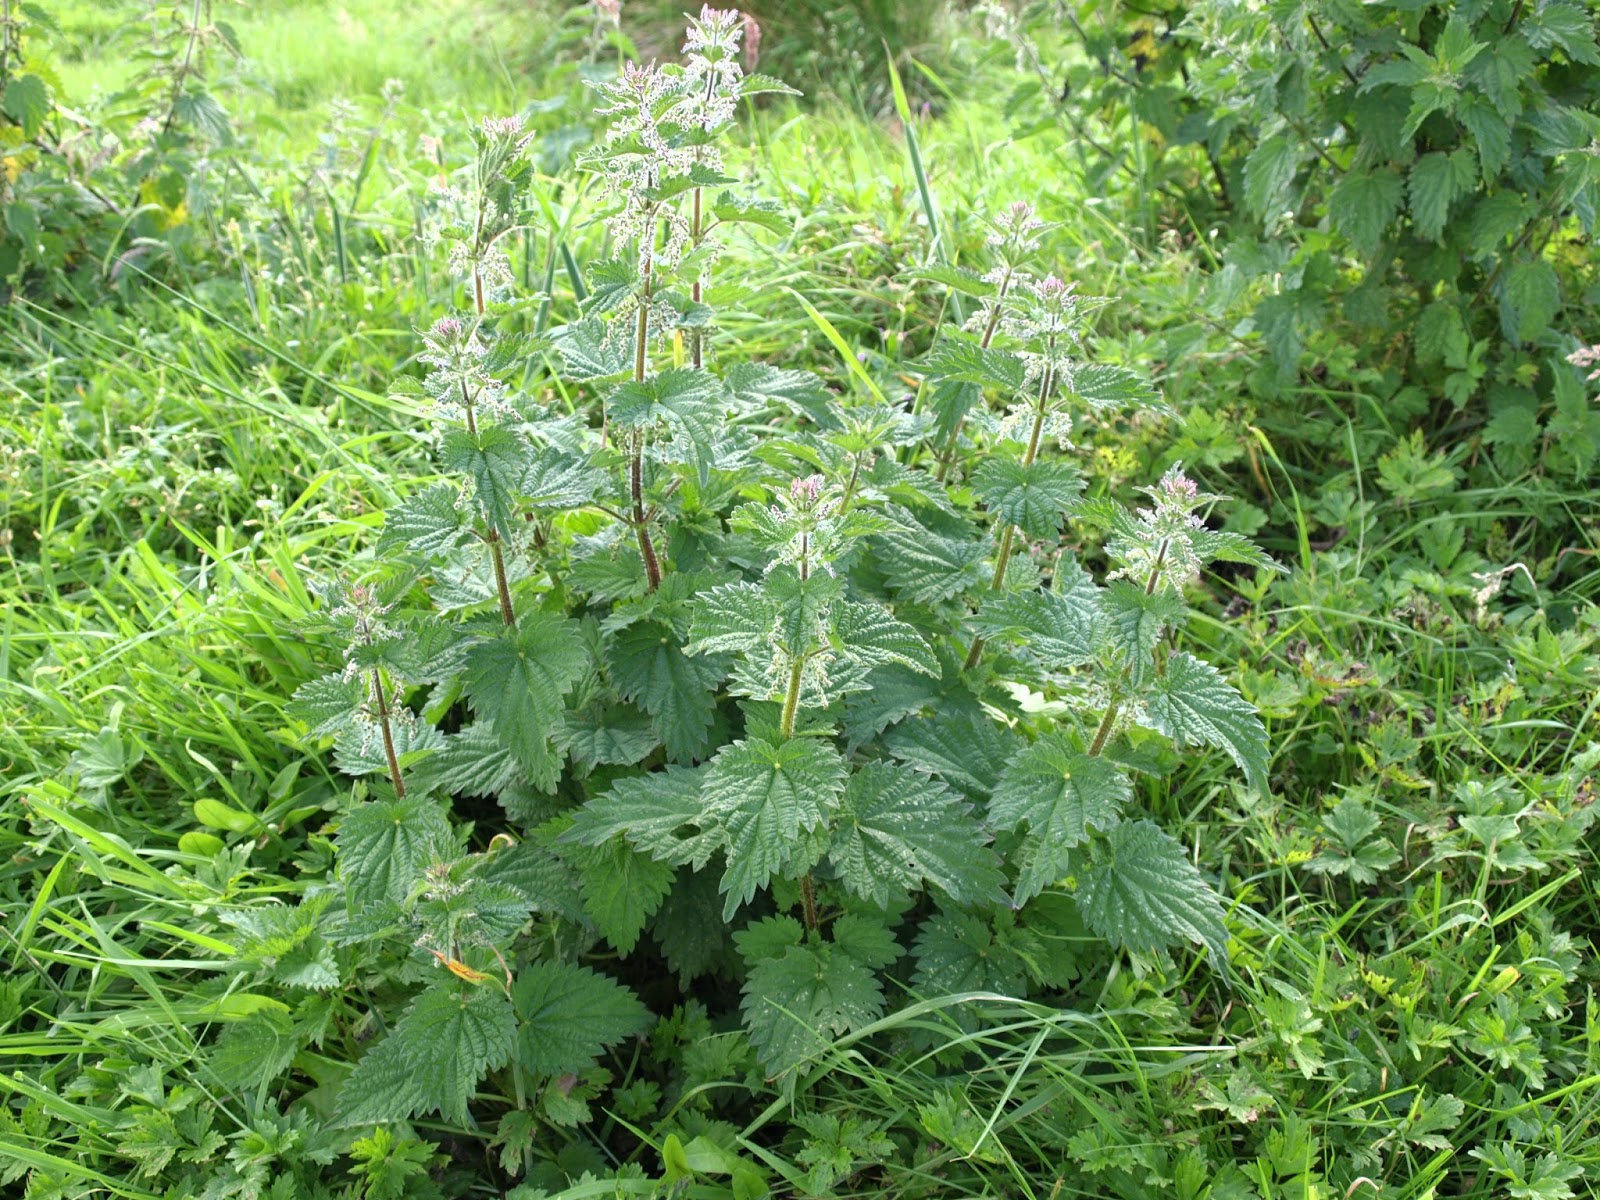 Raw Edible Plants: Stinging nettle (Urtica dioica)